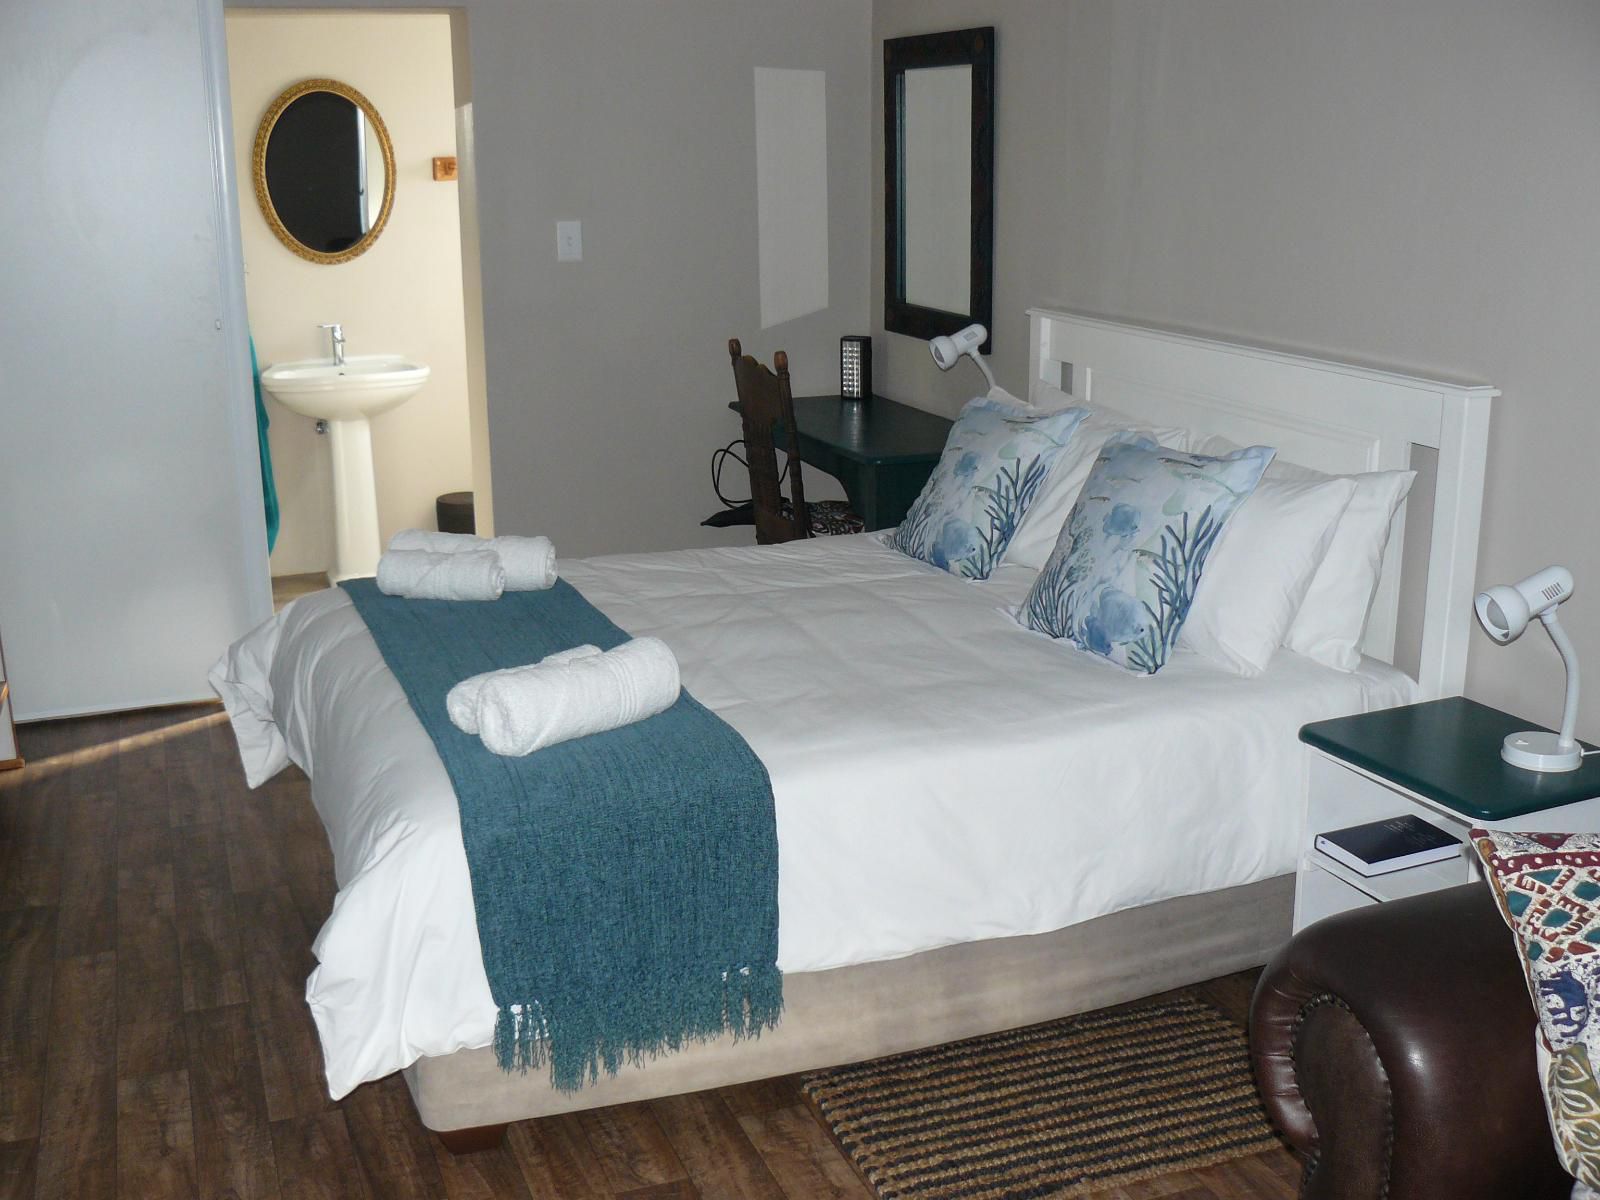 House Of 2 Oceans Agulhas Western Cape South Africa Bedroom